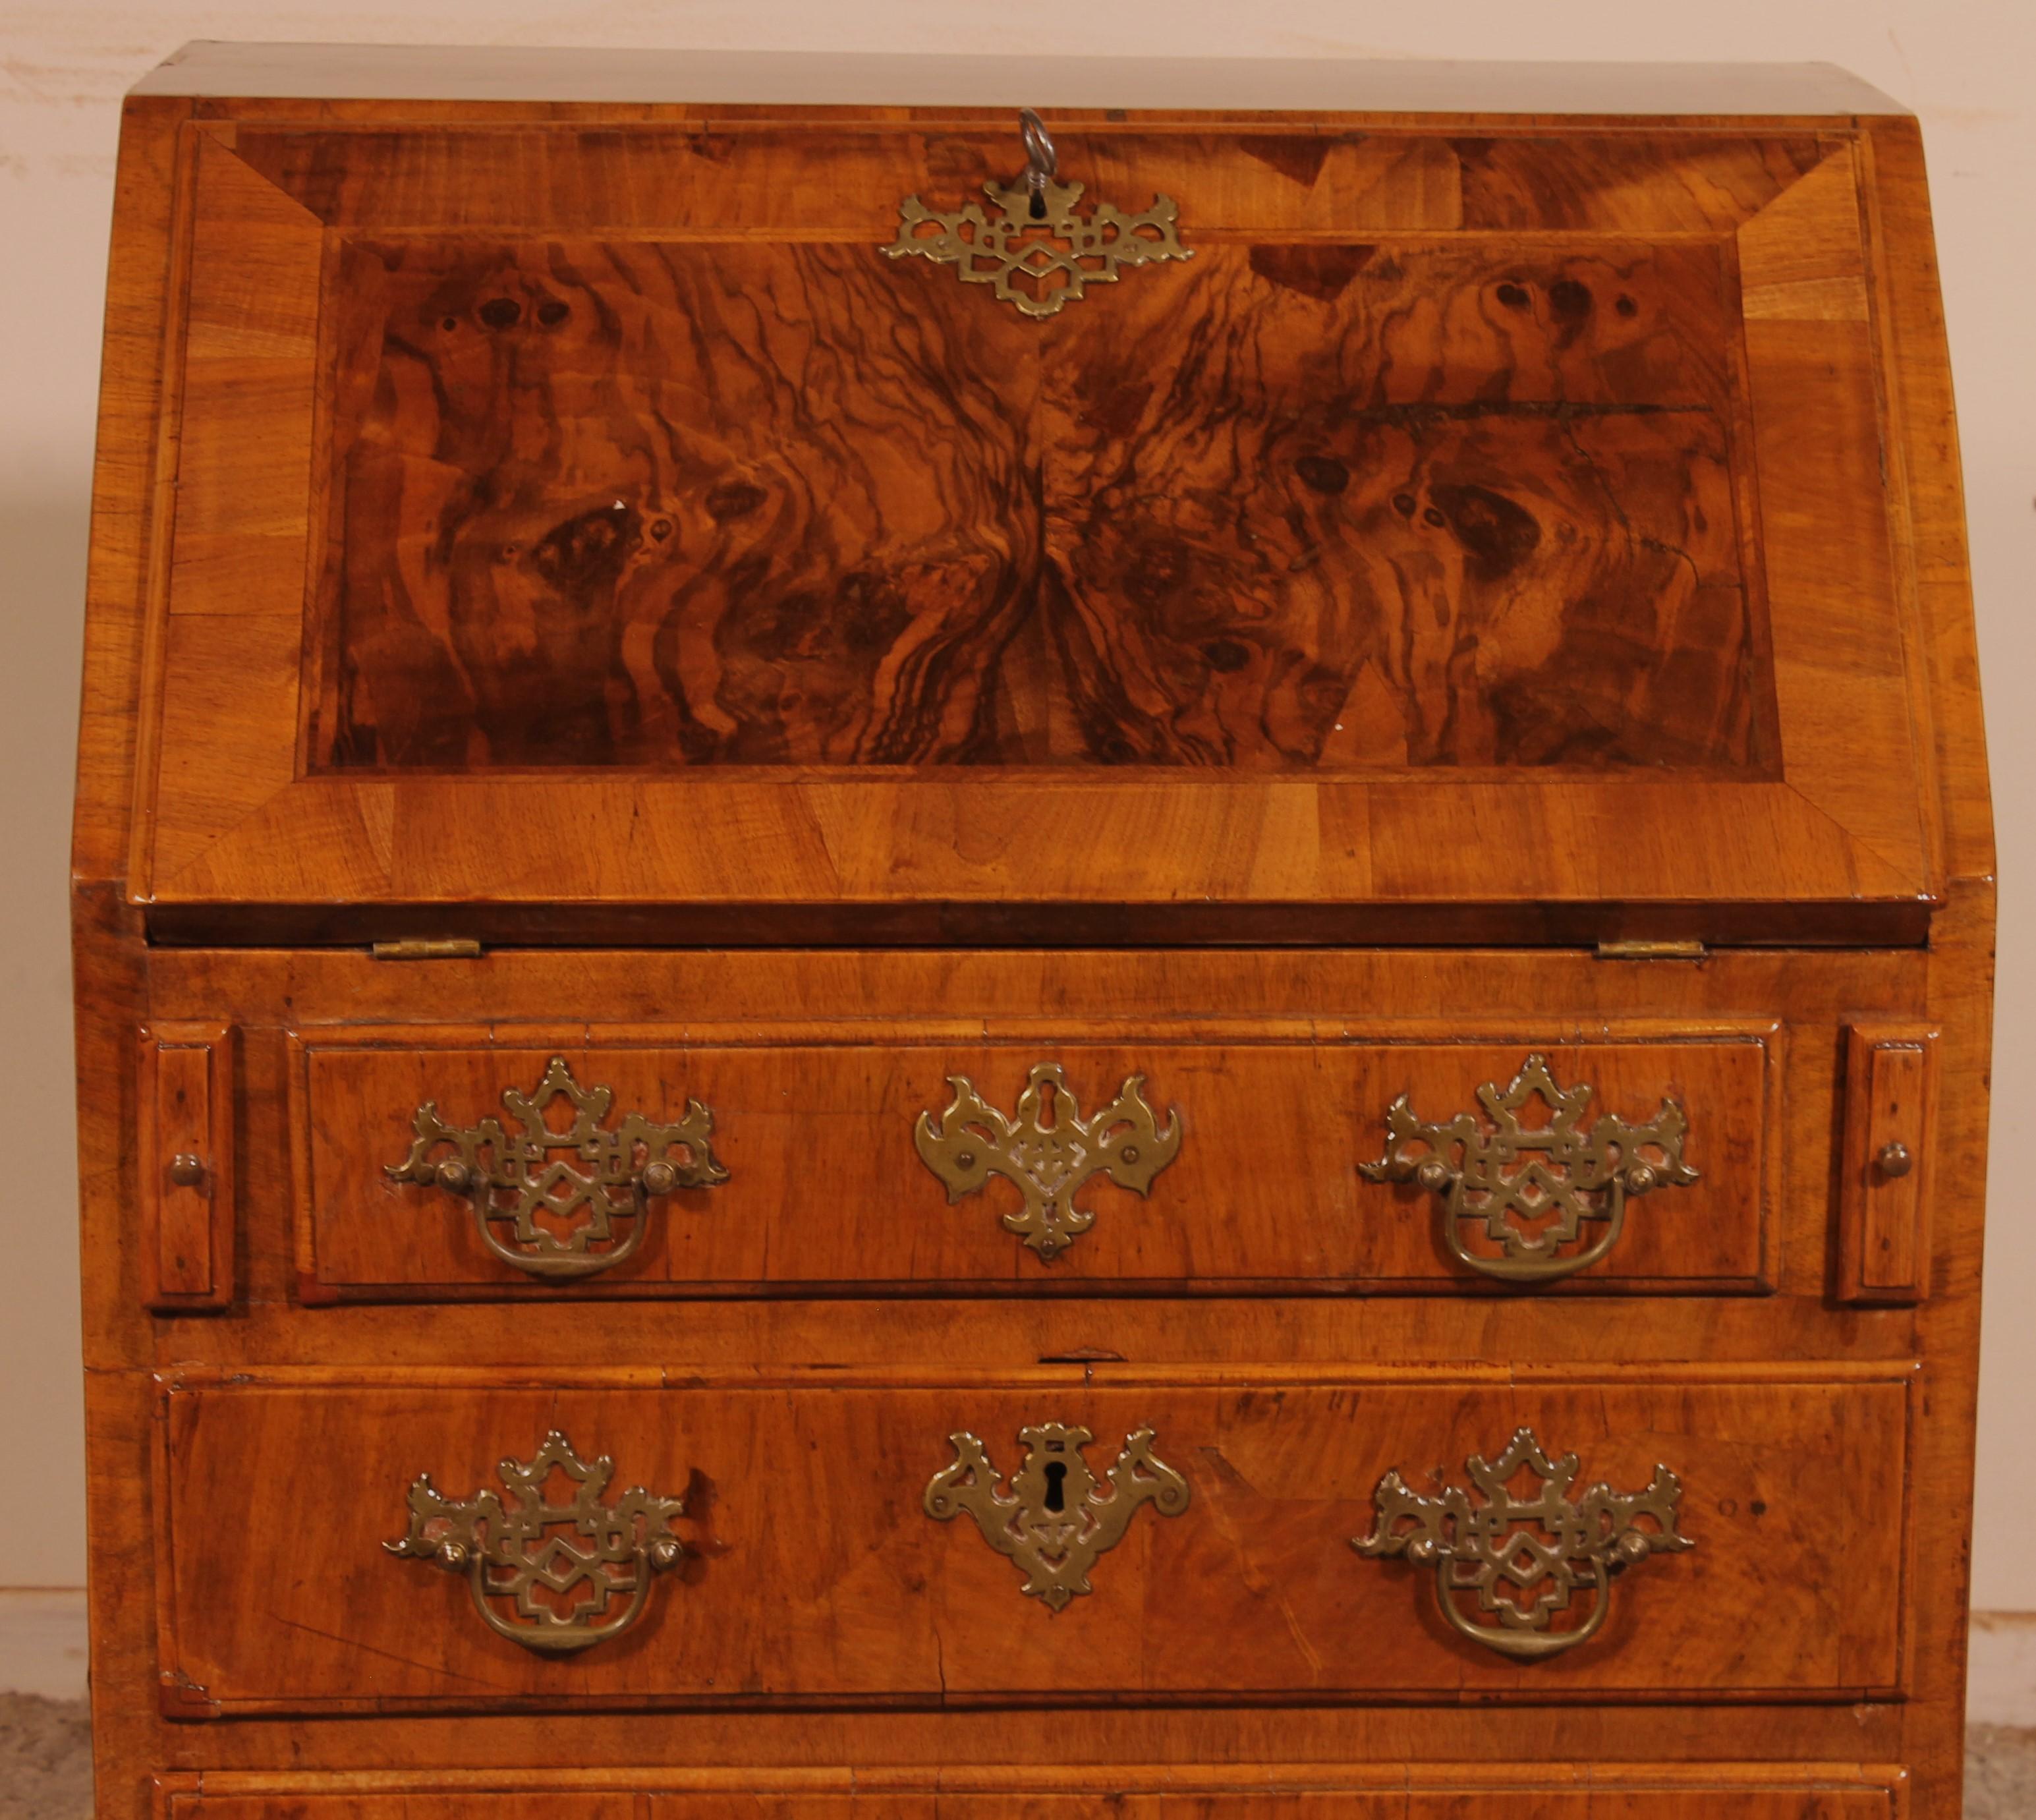 a fine Secretary in walnut and burr walnut from the 18th century

Very good quality and small English model
secretary composed of 3 drawers as well as a theater.
Entirely in walnut with a burr walnut flap. It is rare to find a walnut secretary